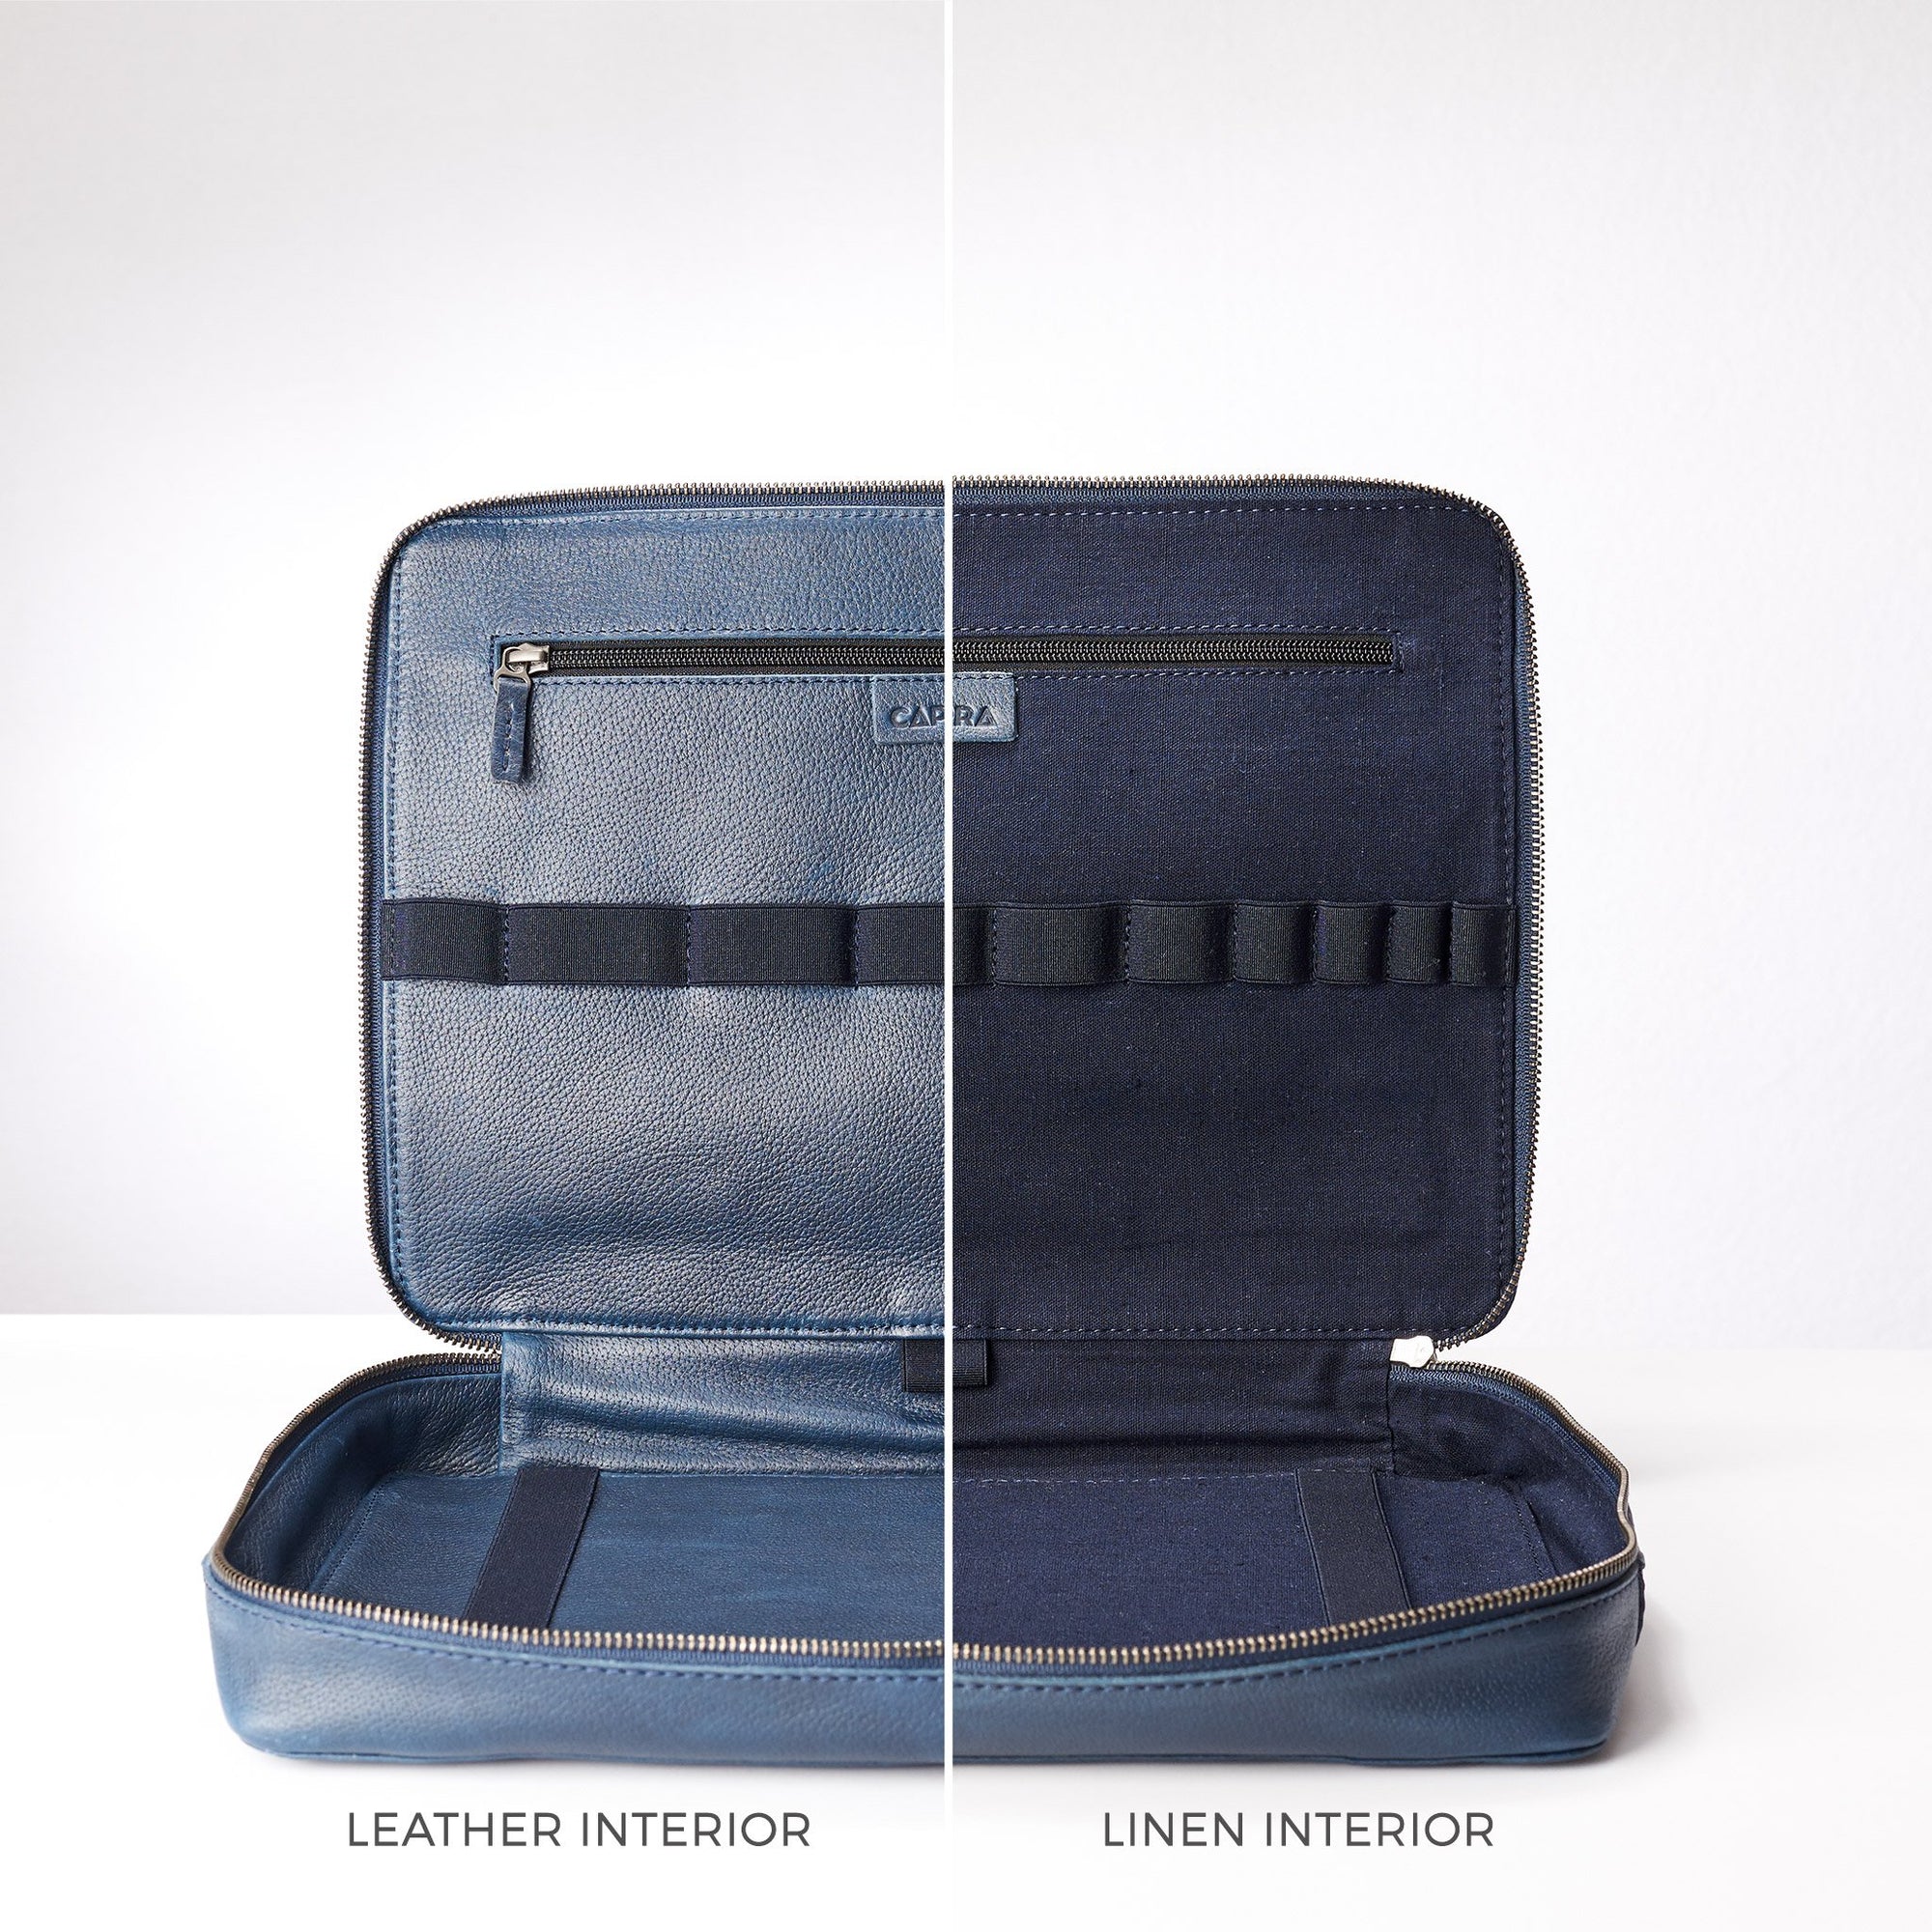 Personalize leather or linen interior. Navy blue large tech bag by Capra Leather